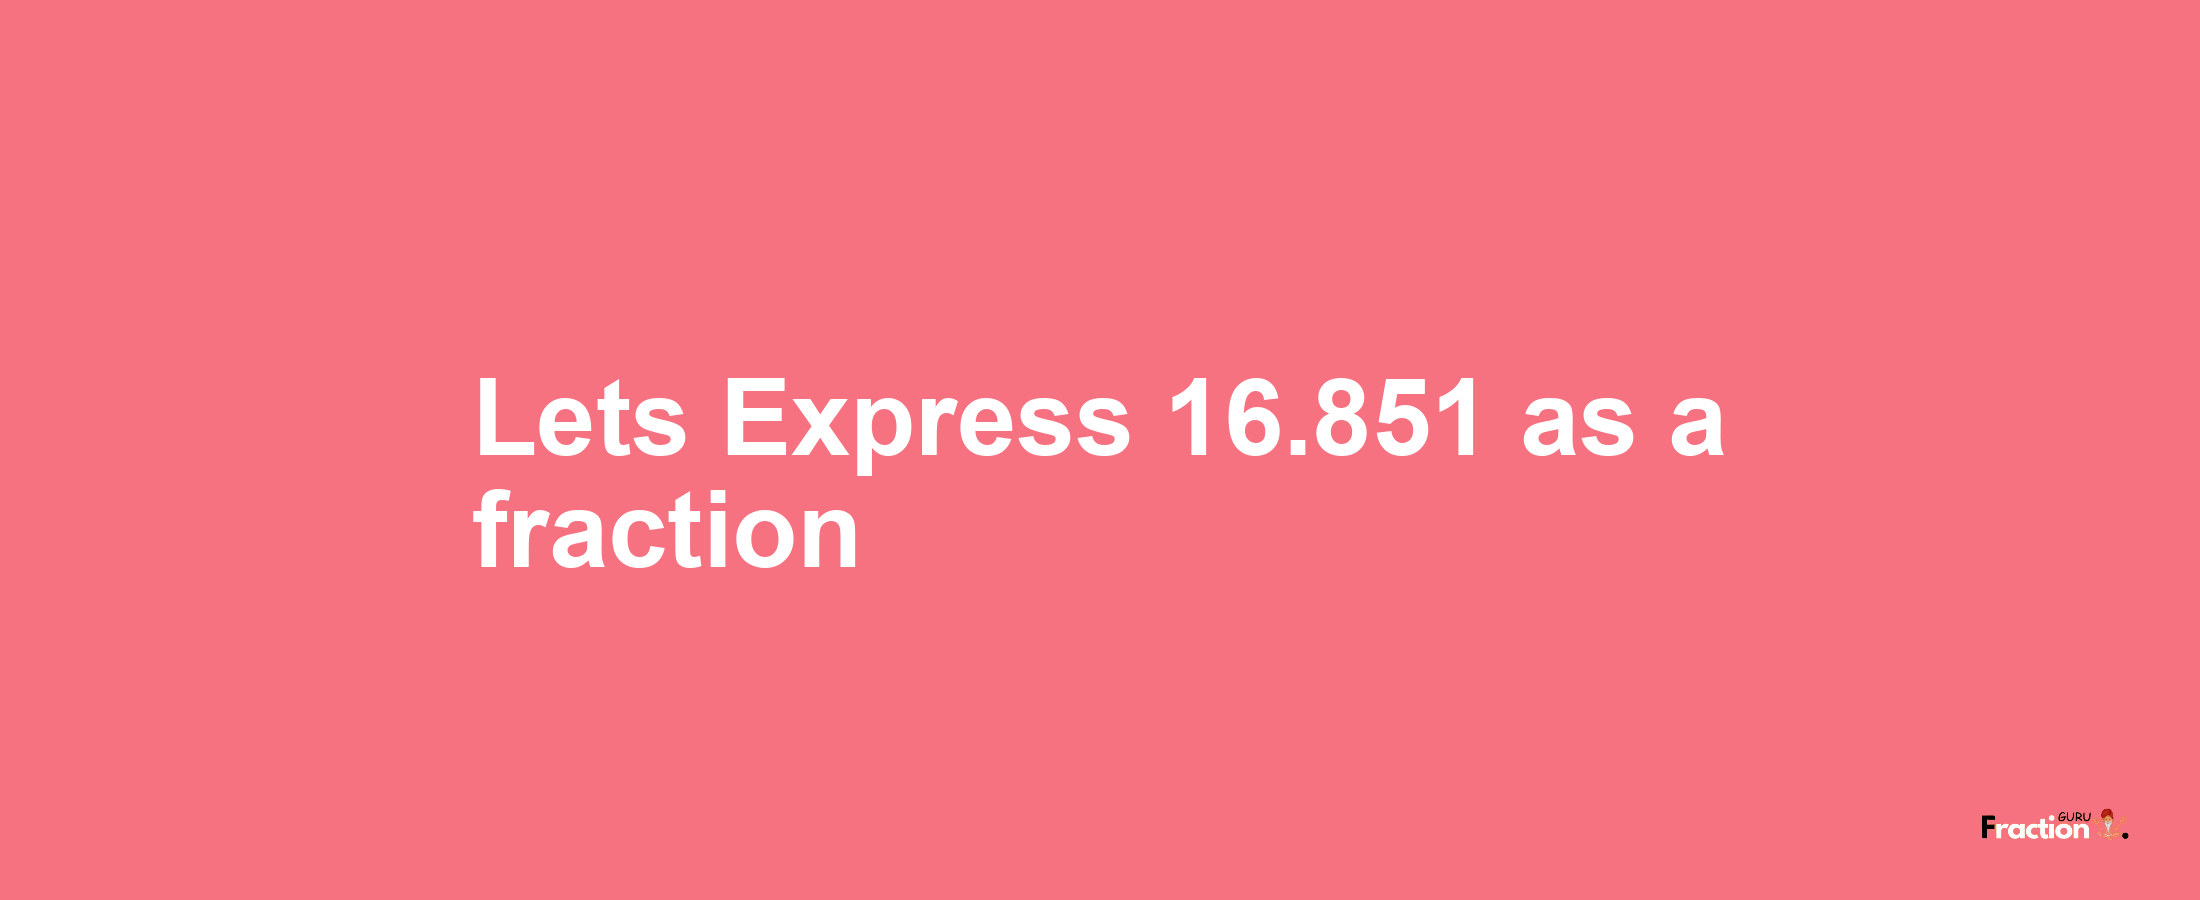 Lets Express 16.851 as afraction